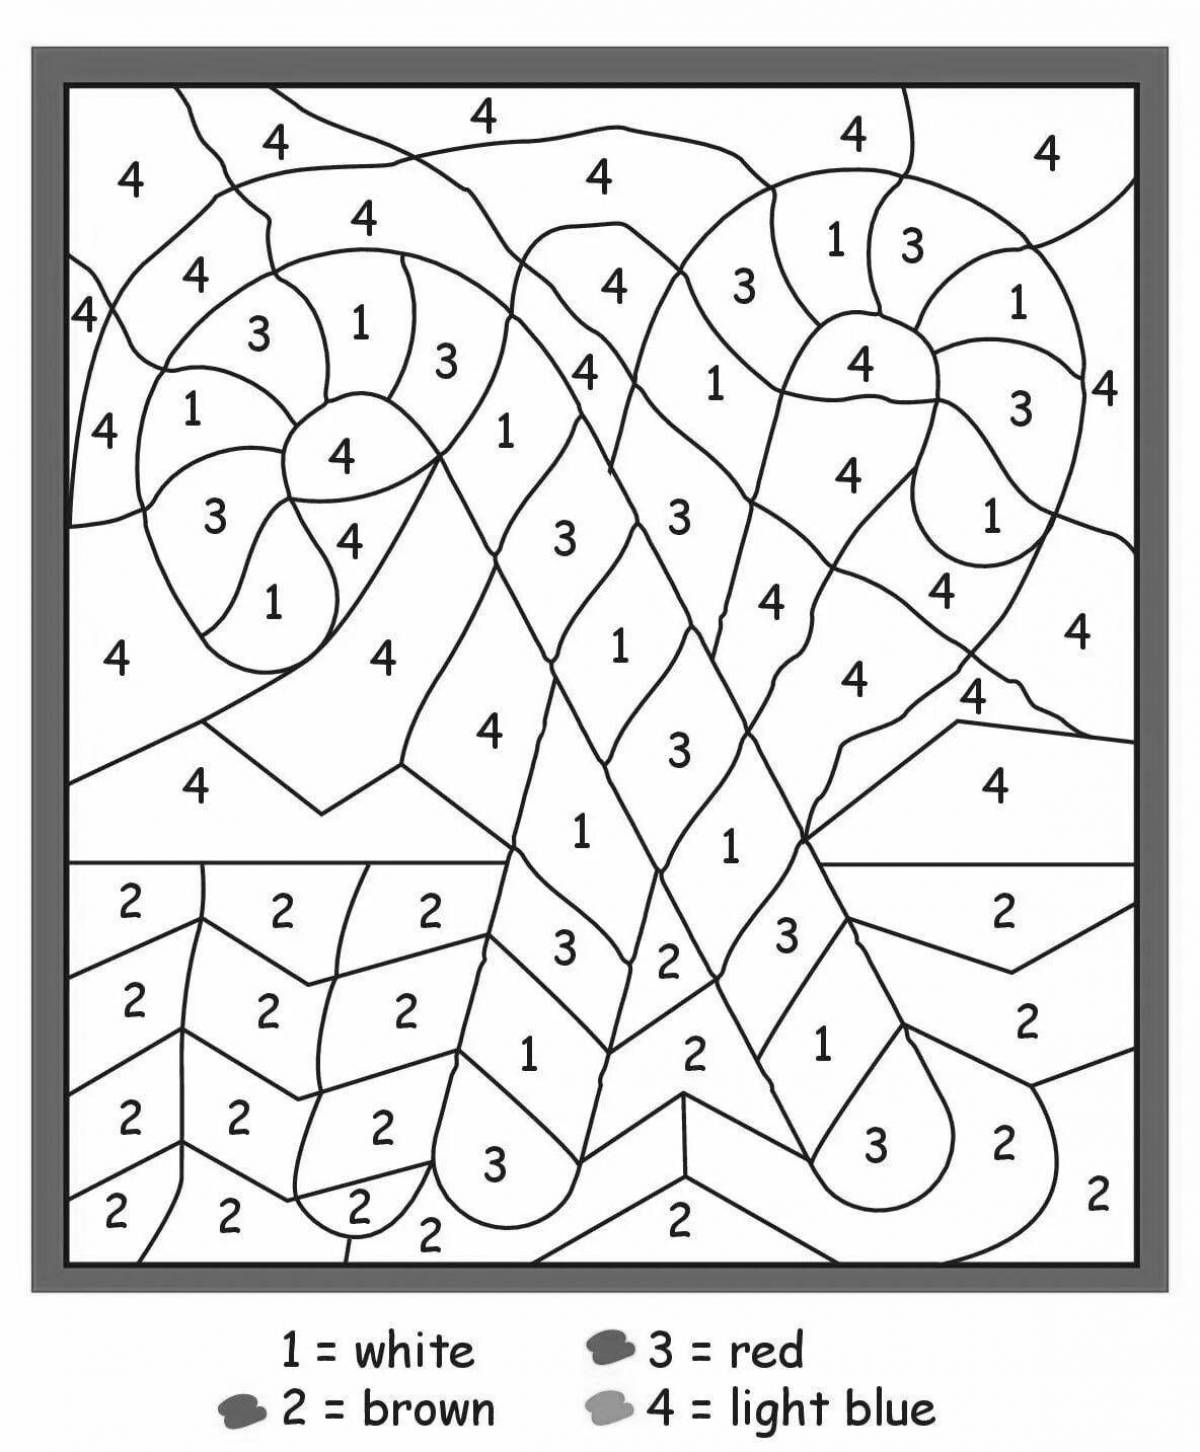 Color frenzy tree by numbers coloring book